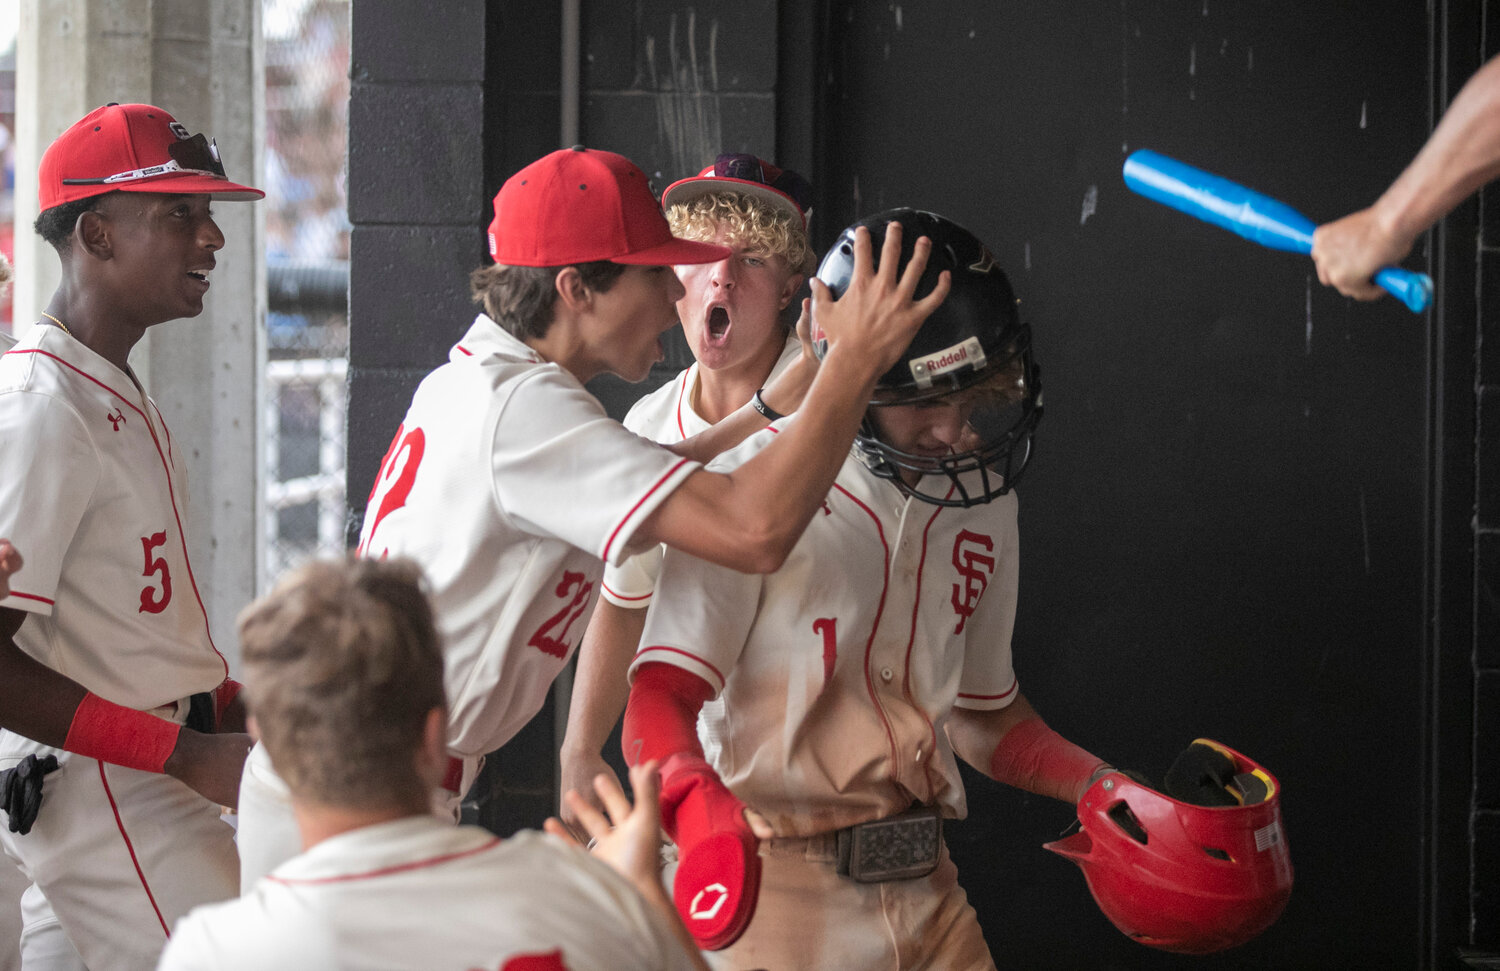 Spanish Fort senior Blake Smith is greeted by his teammates after coming around to score a run in the second inning that helped the Toros erase an early deficit to the Saraland Spartans in Game 3 of the AHSAA state quarterfinal series on the Hill Saturday, May 6.